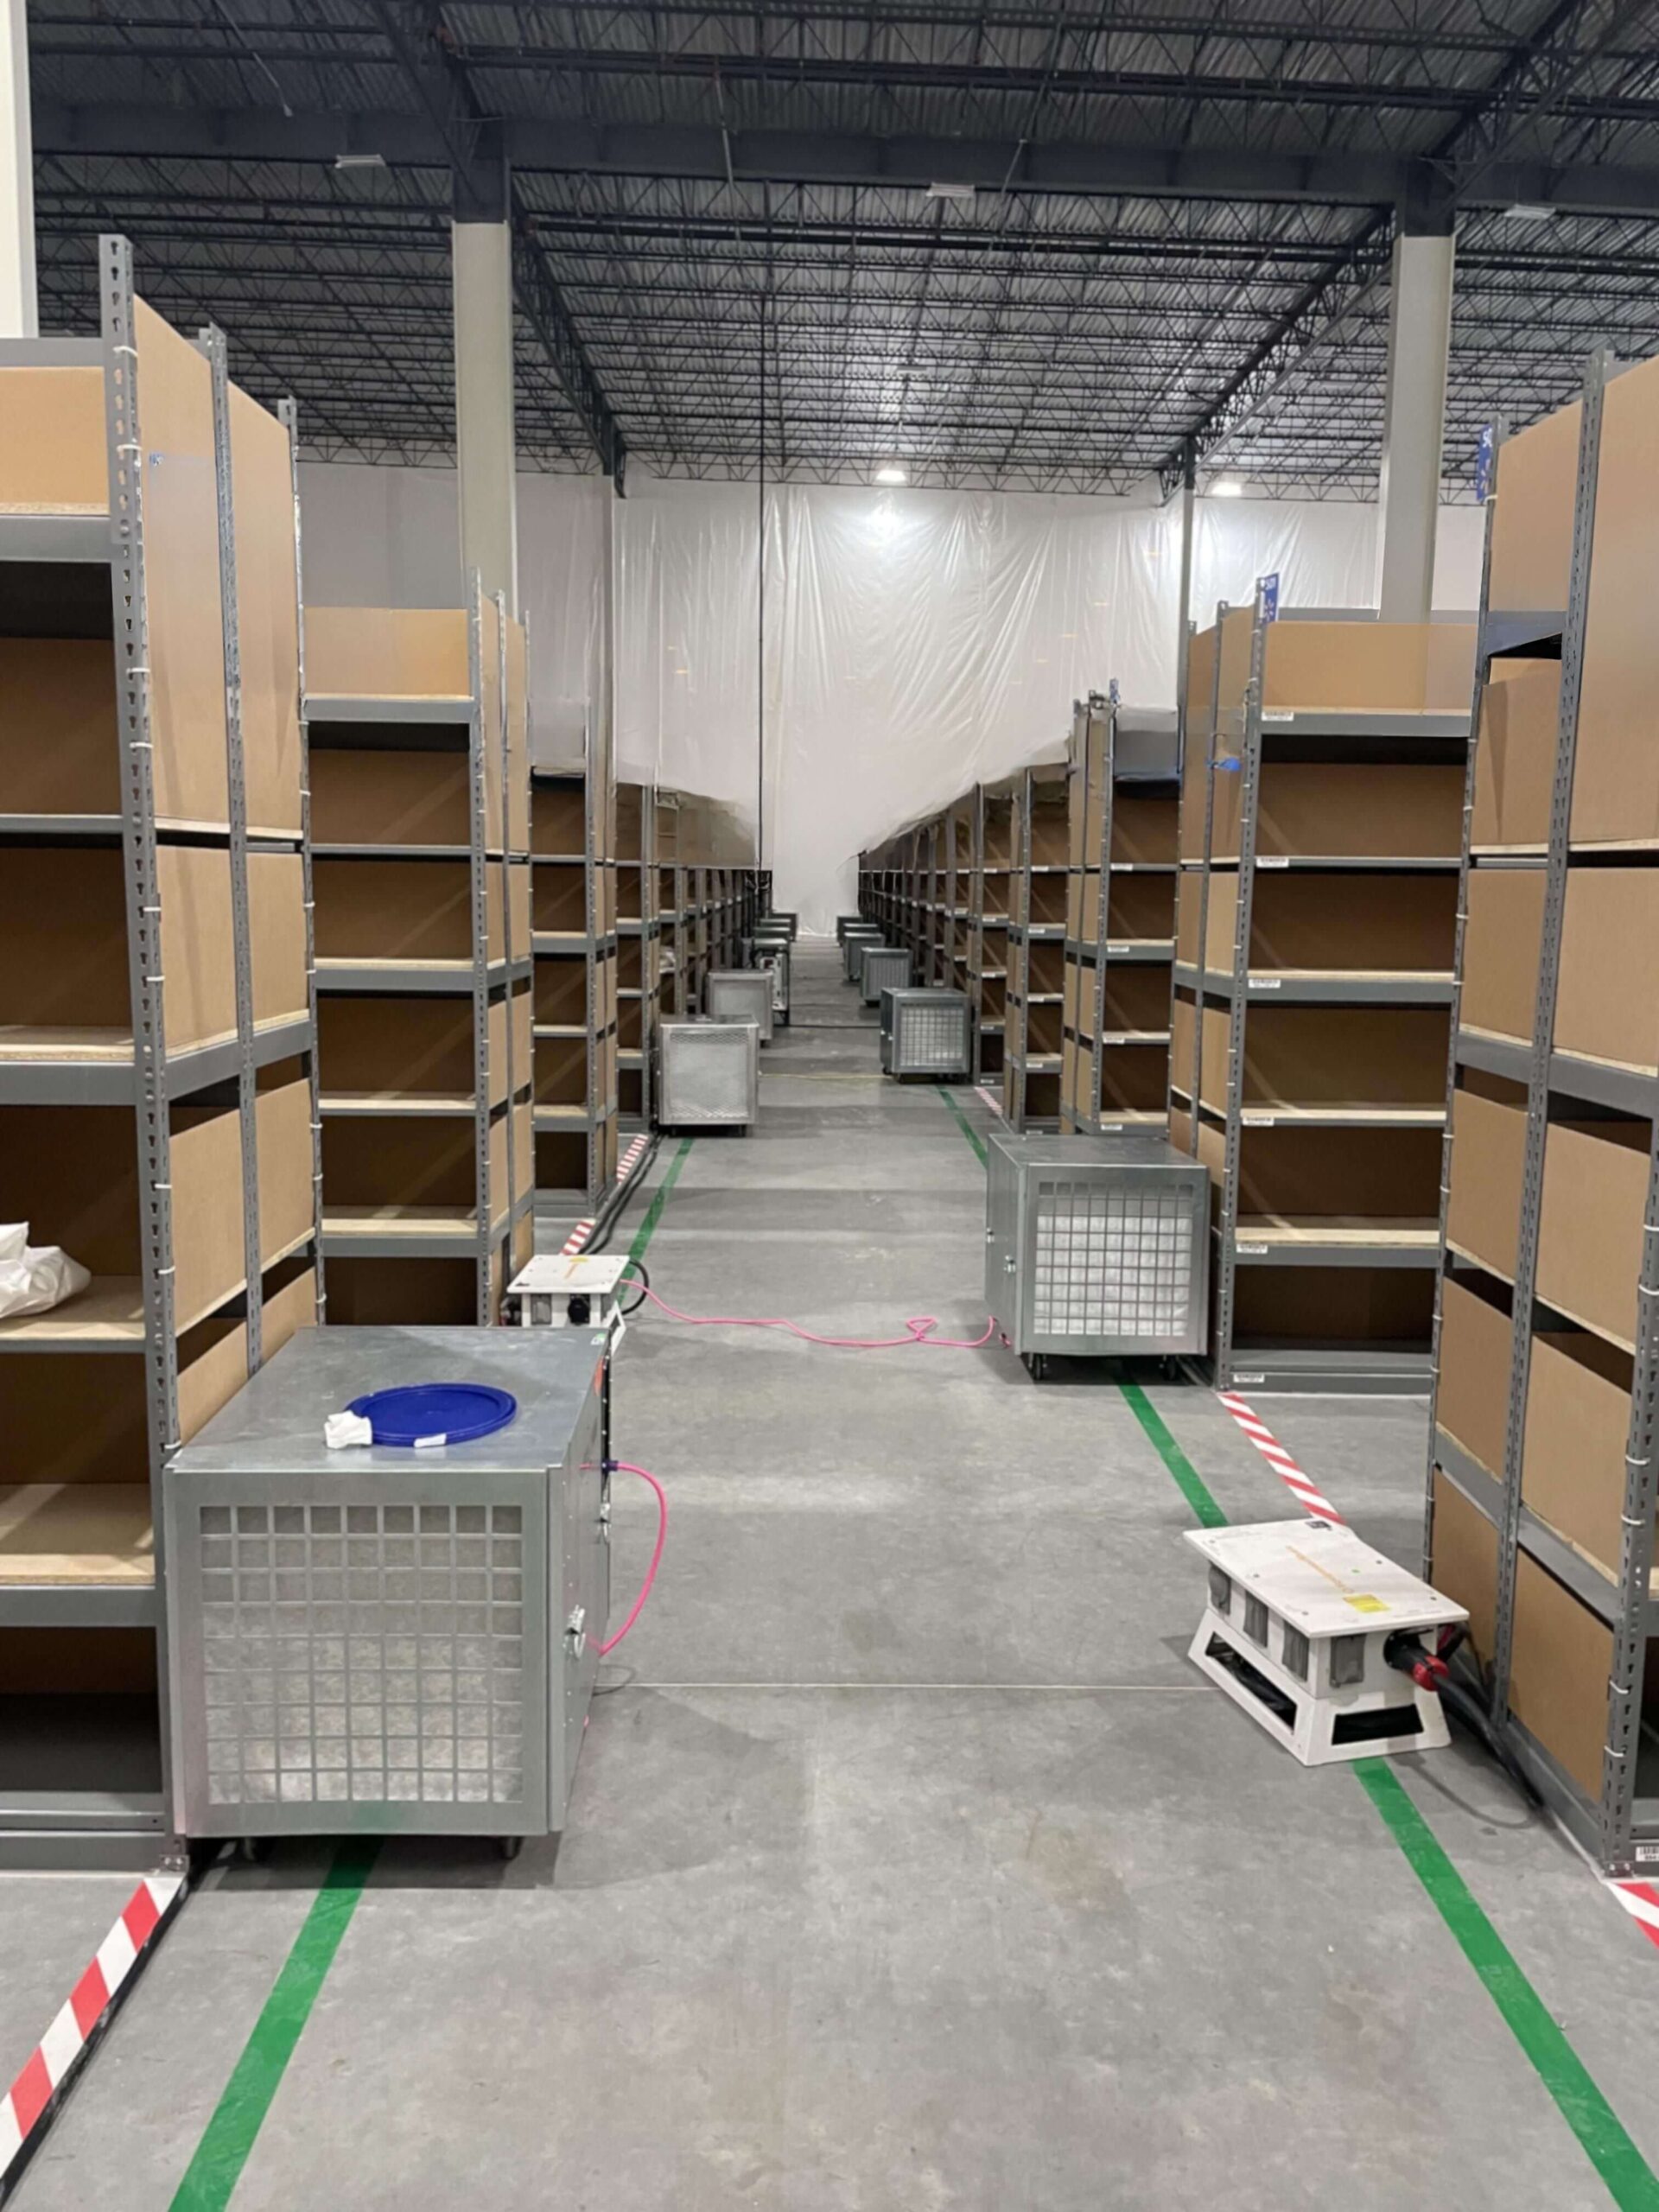 empty shelves in a distribution center